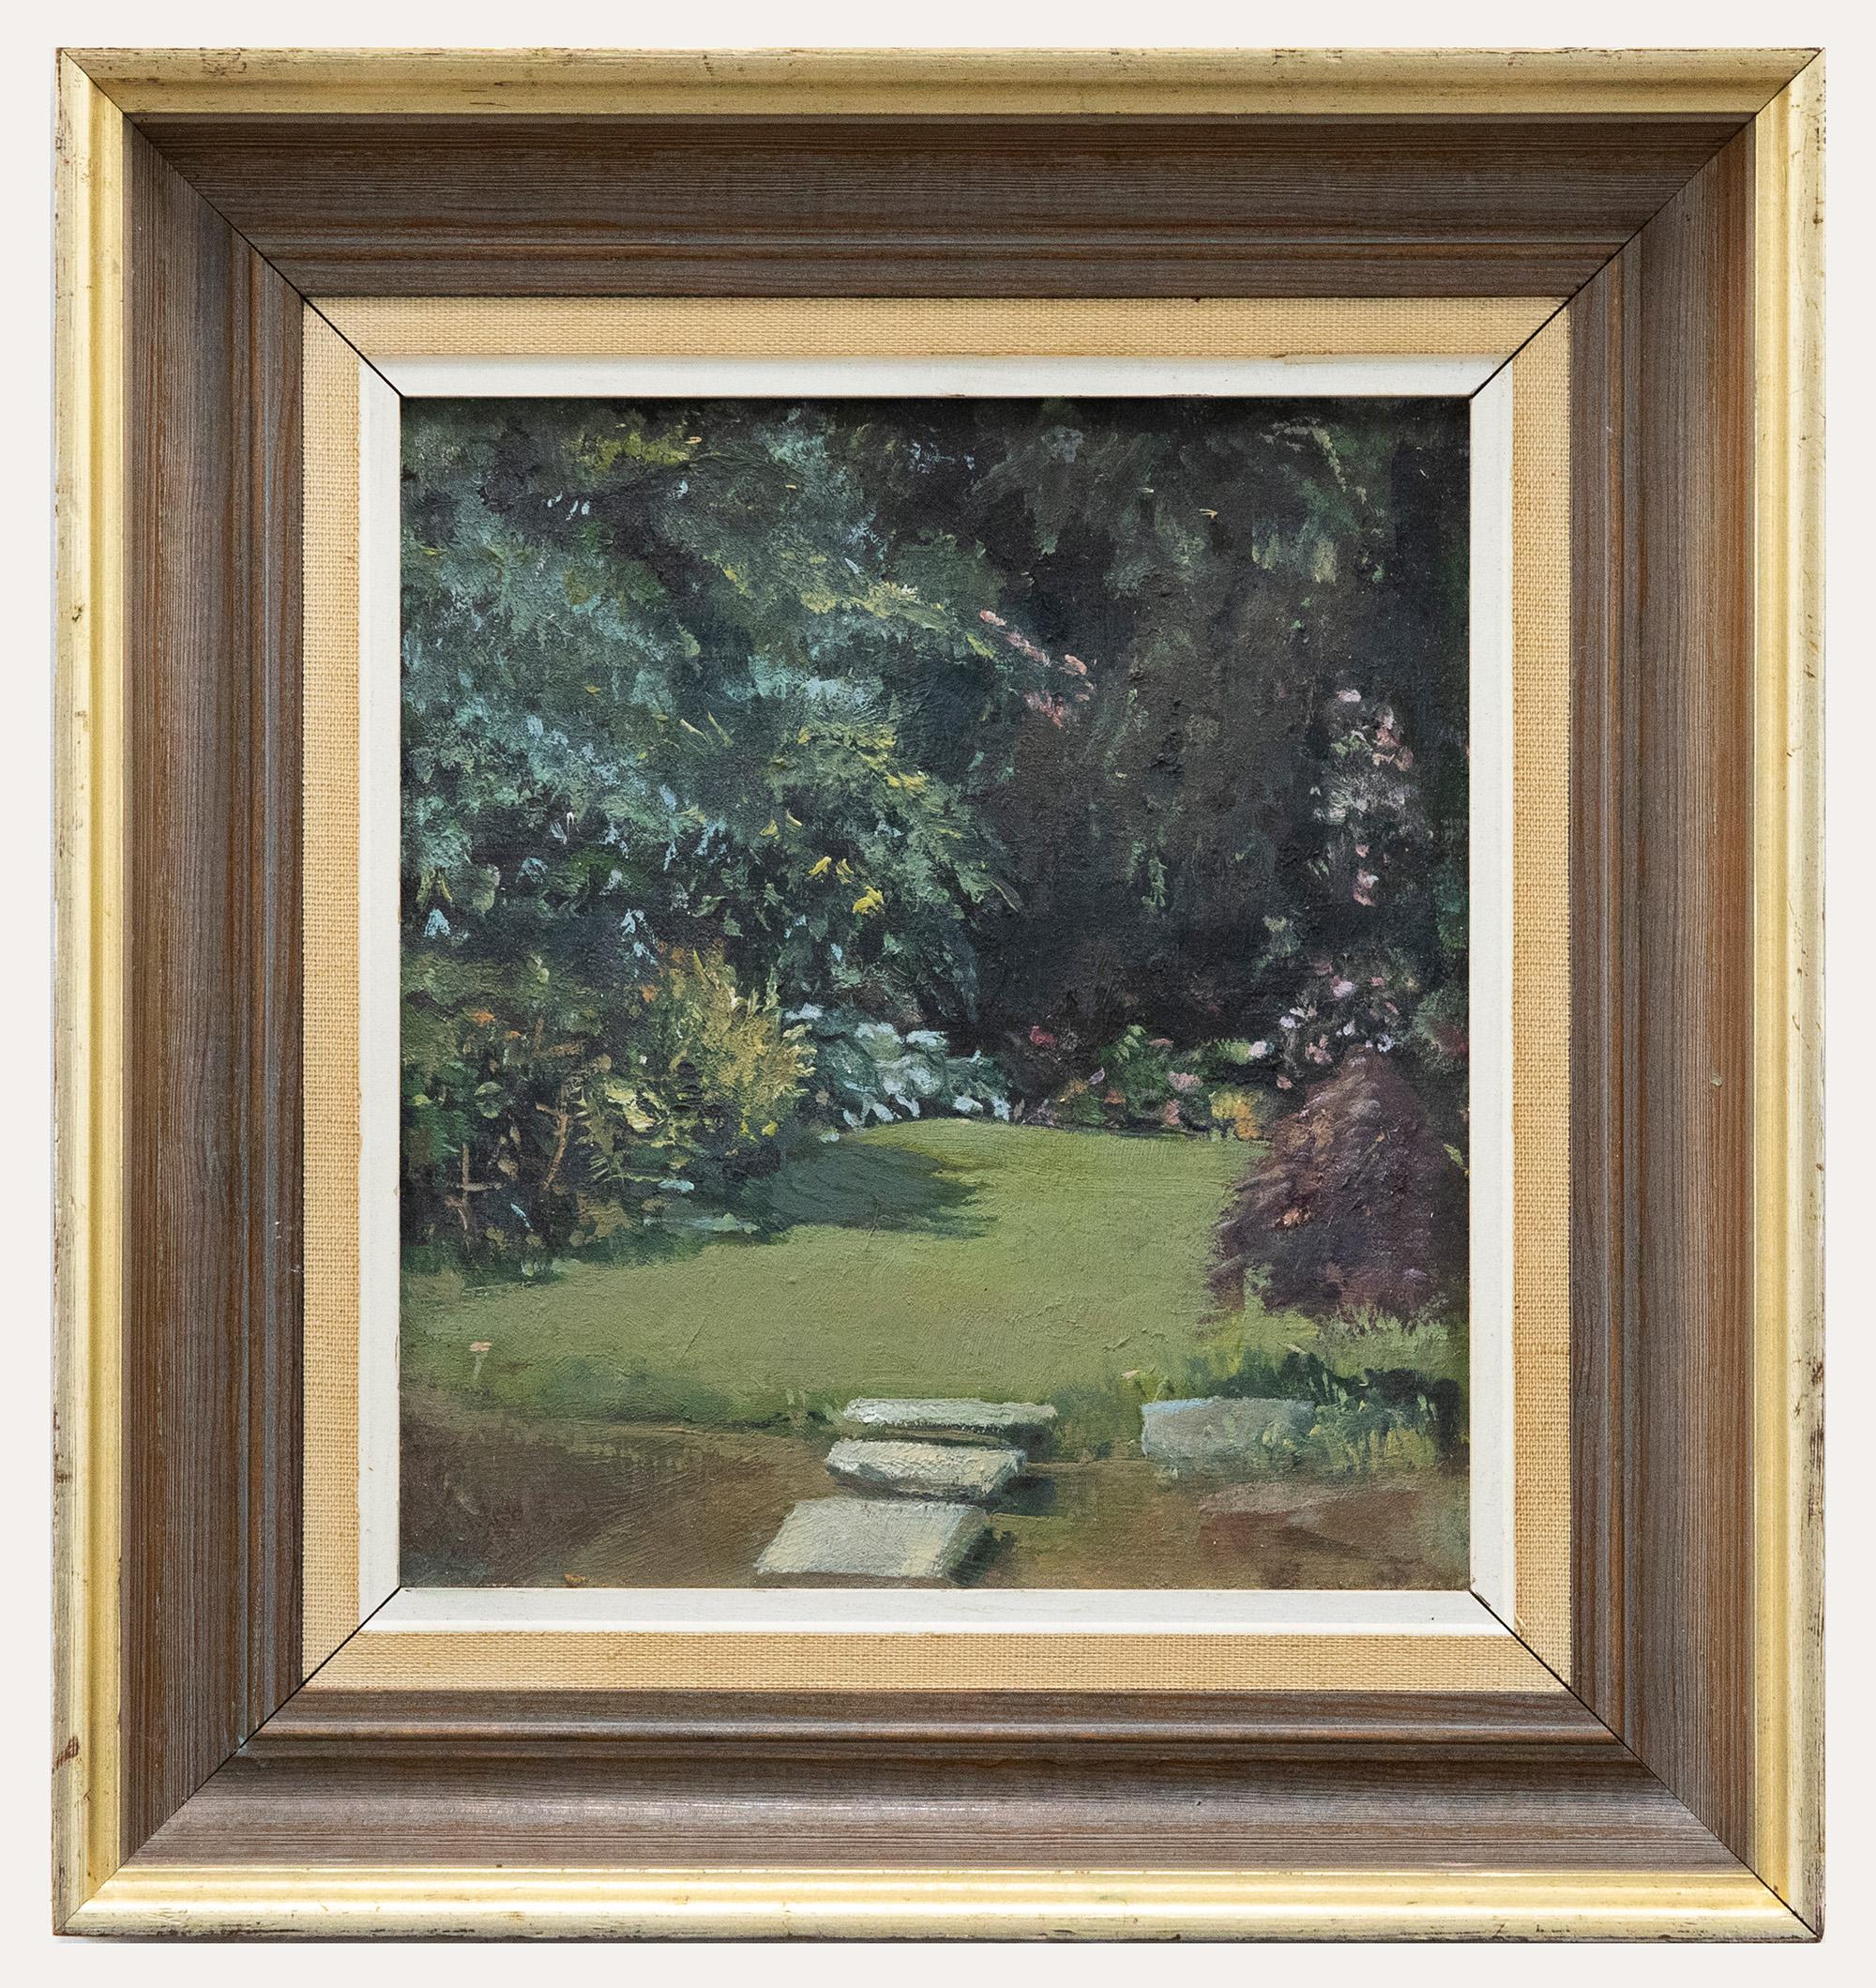 Unknown Landscape Painting - Jose Bale - 20th Century Oil, The Garden